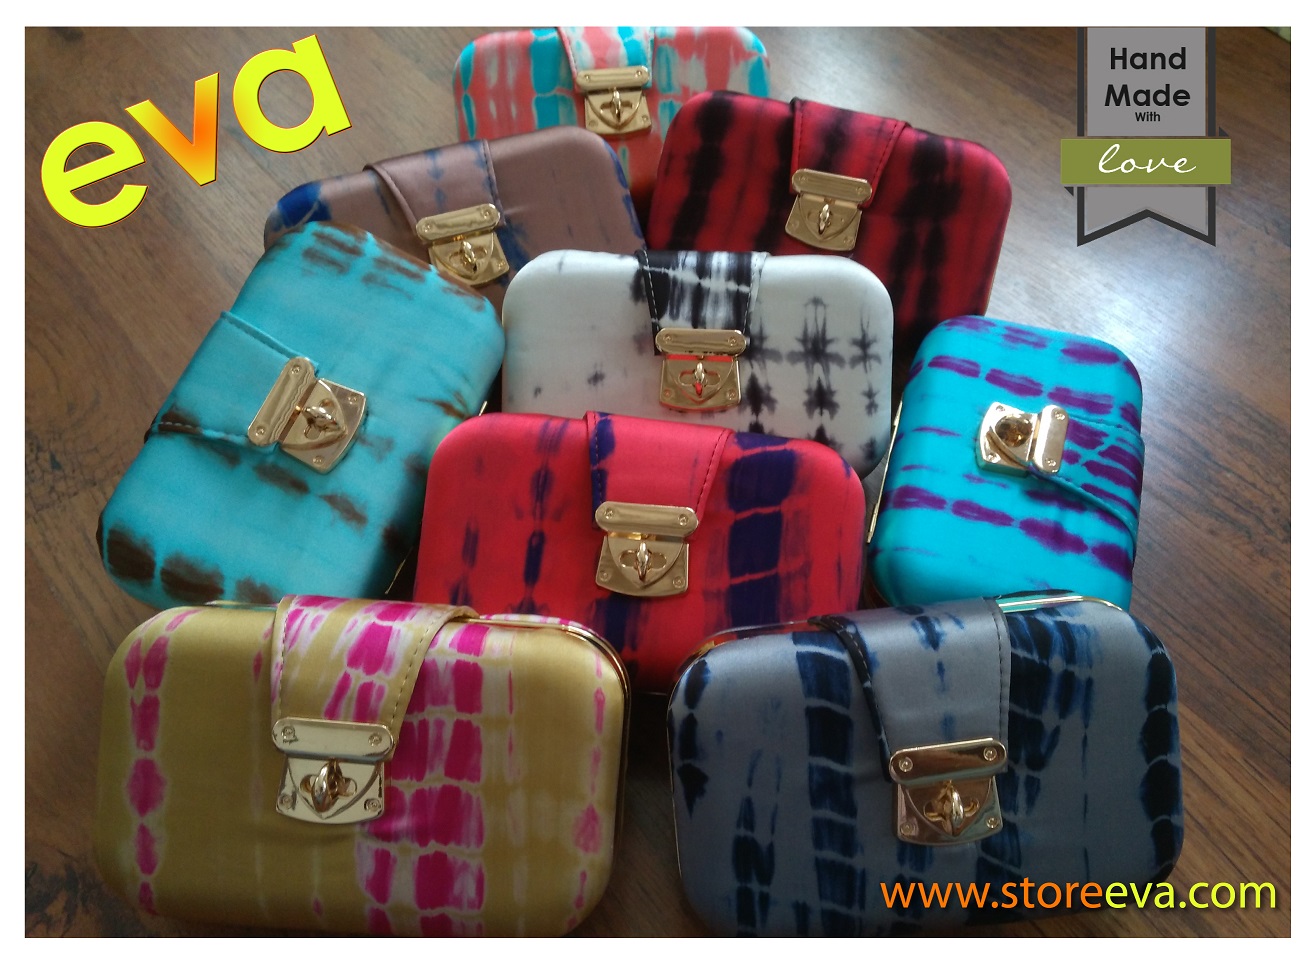 Store Eva Tie-and-Dye Clutches